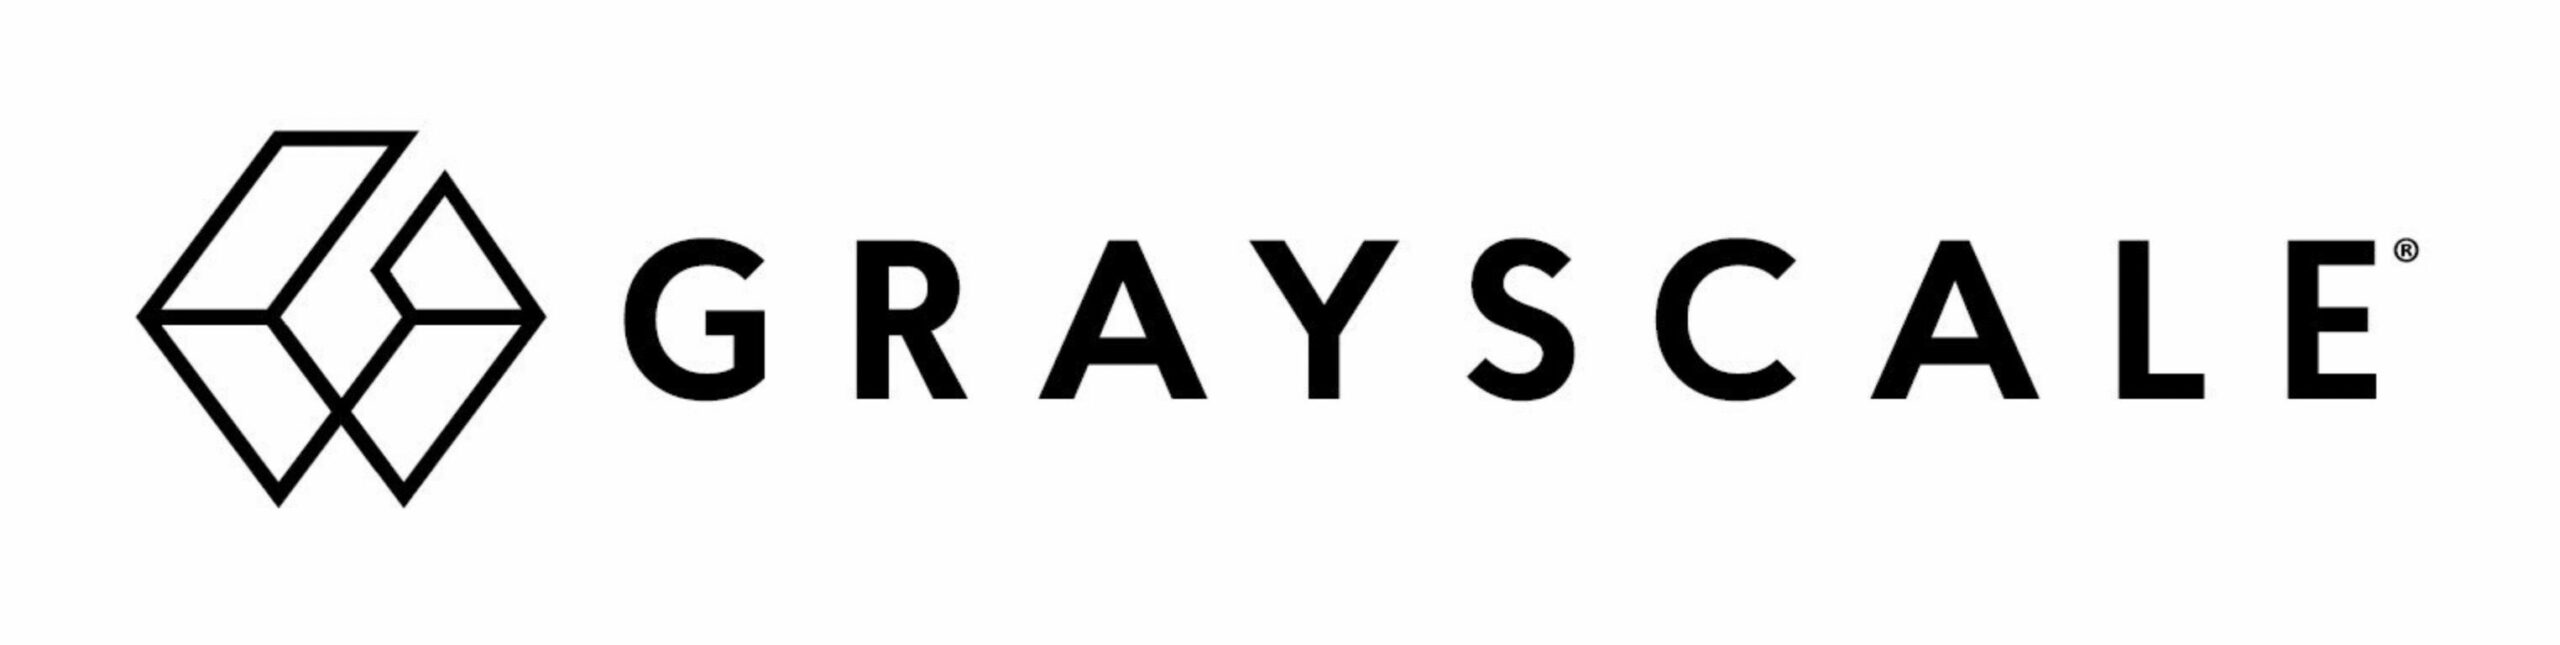 CRYPTONEWSBYTES.COM Grayscale-Investments-scaled FTX Debtors Take on Grayscale Investments, LLC in $1 Billion Lawsuit Over Alleged Cryptocurrency Price Manipulation  